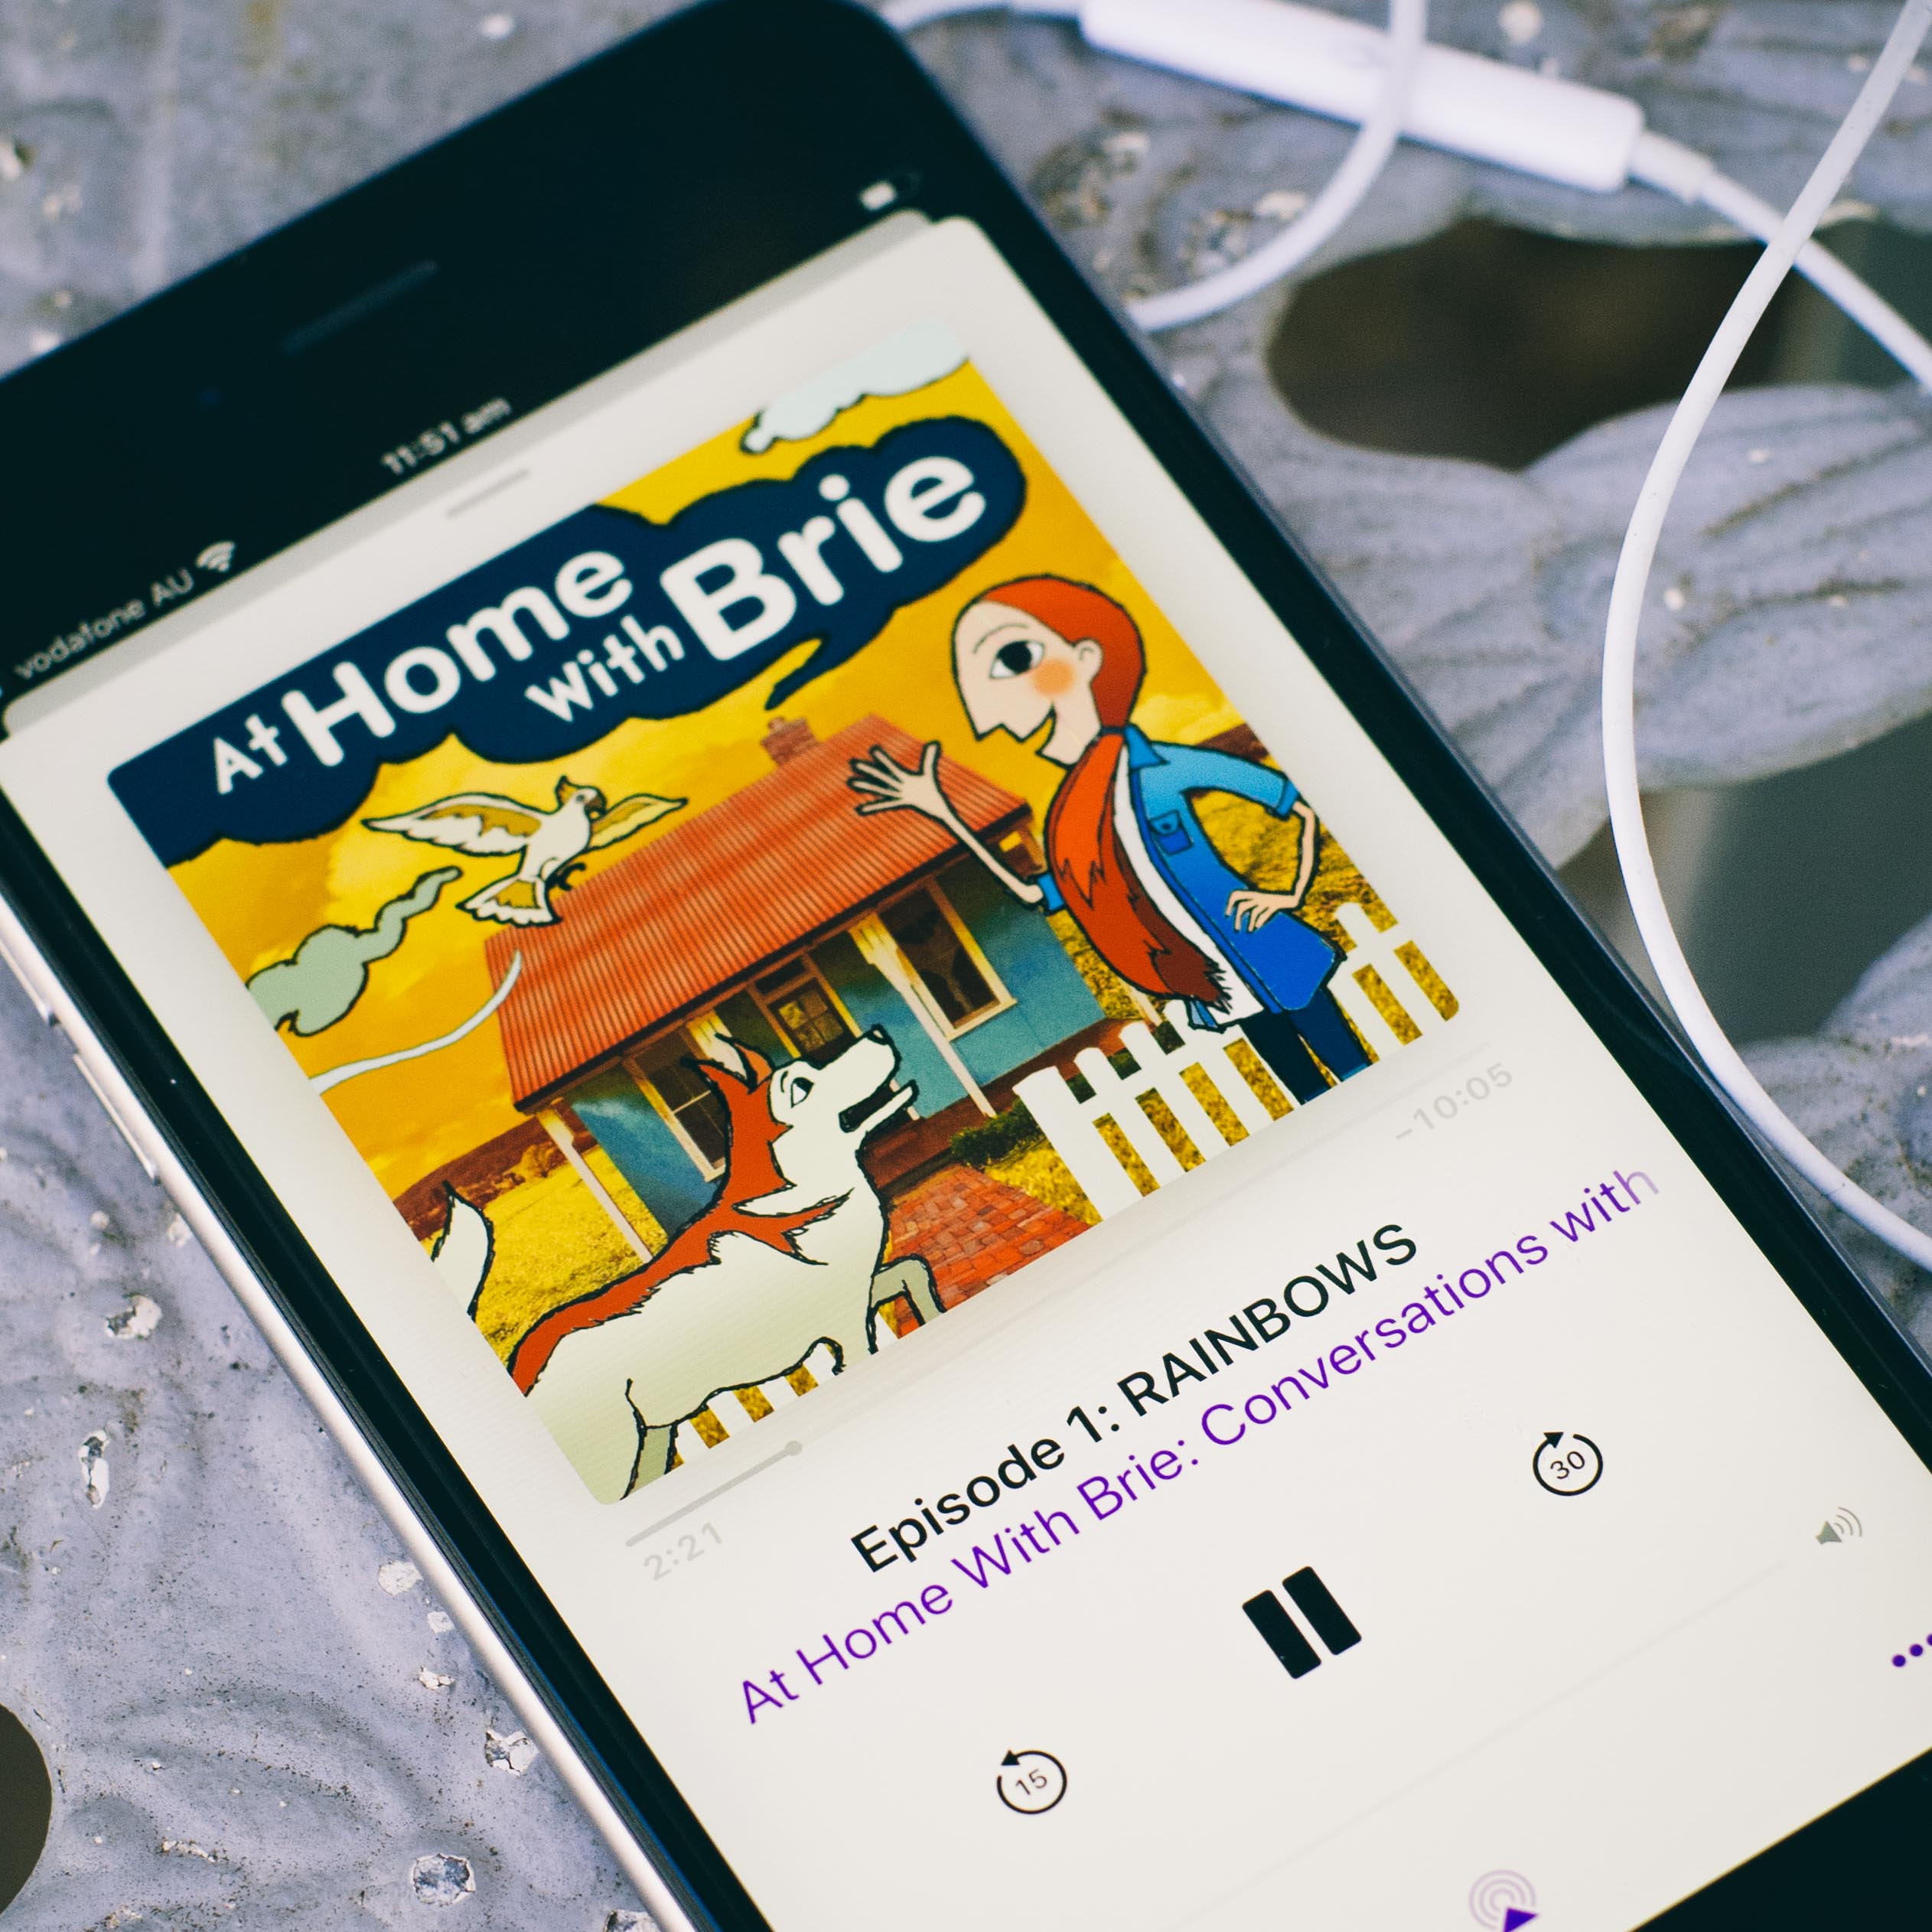 At Home With Brie podcast  in itunes